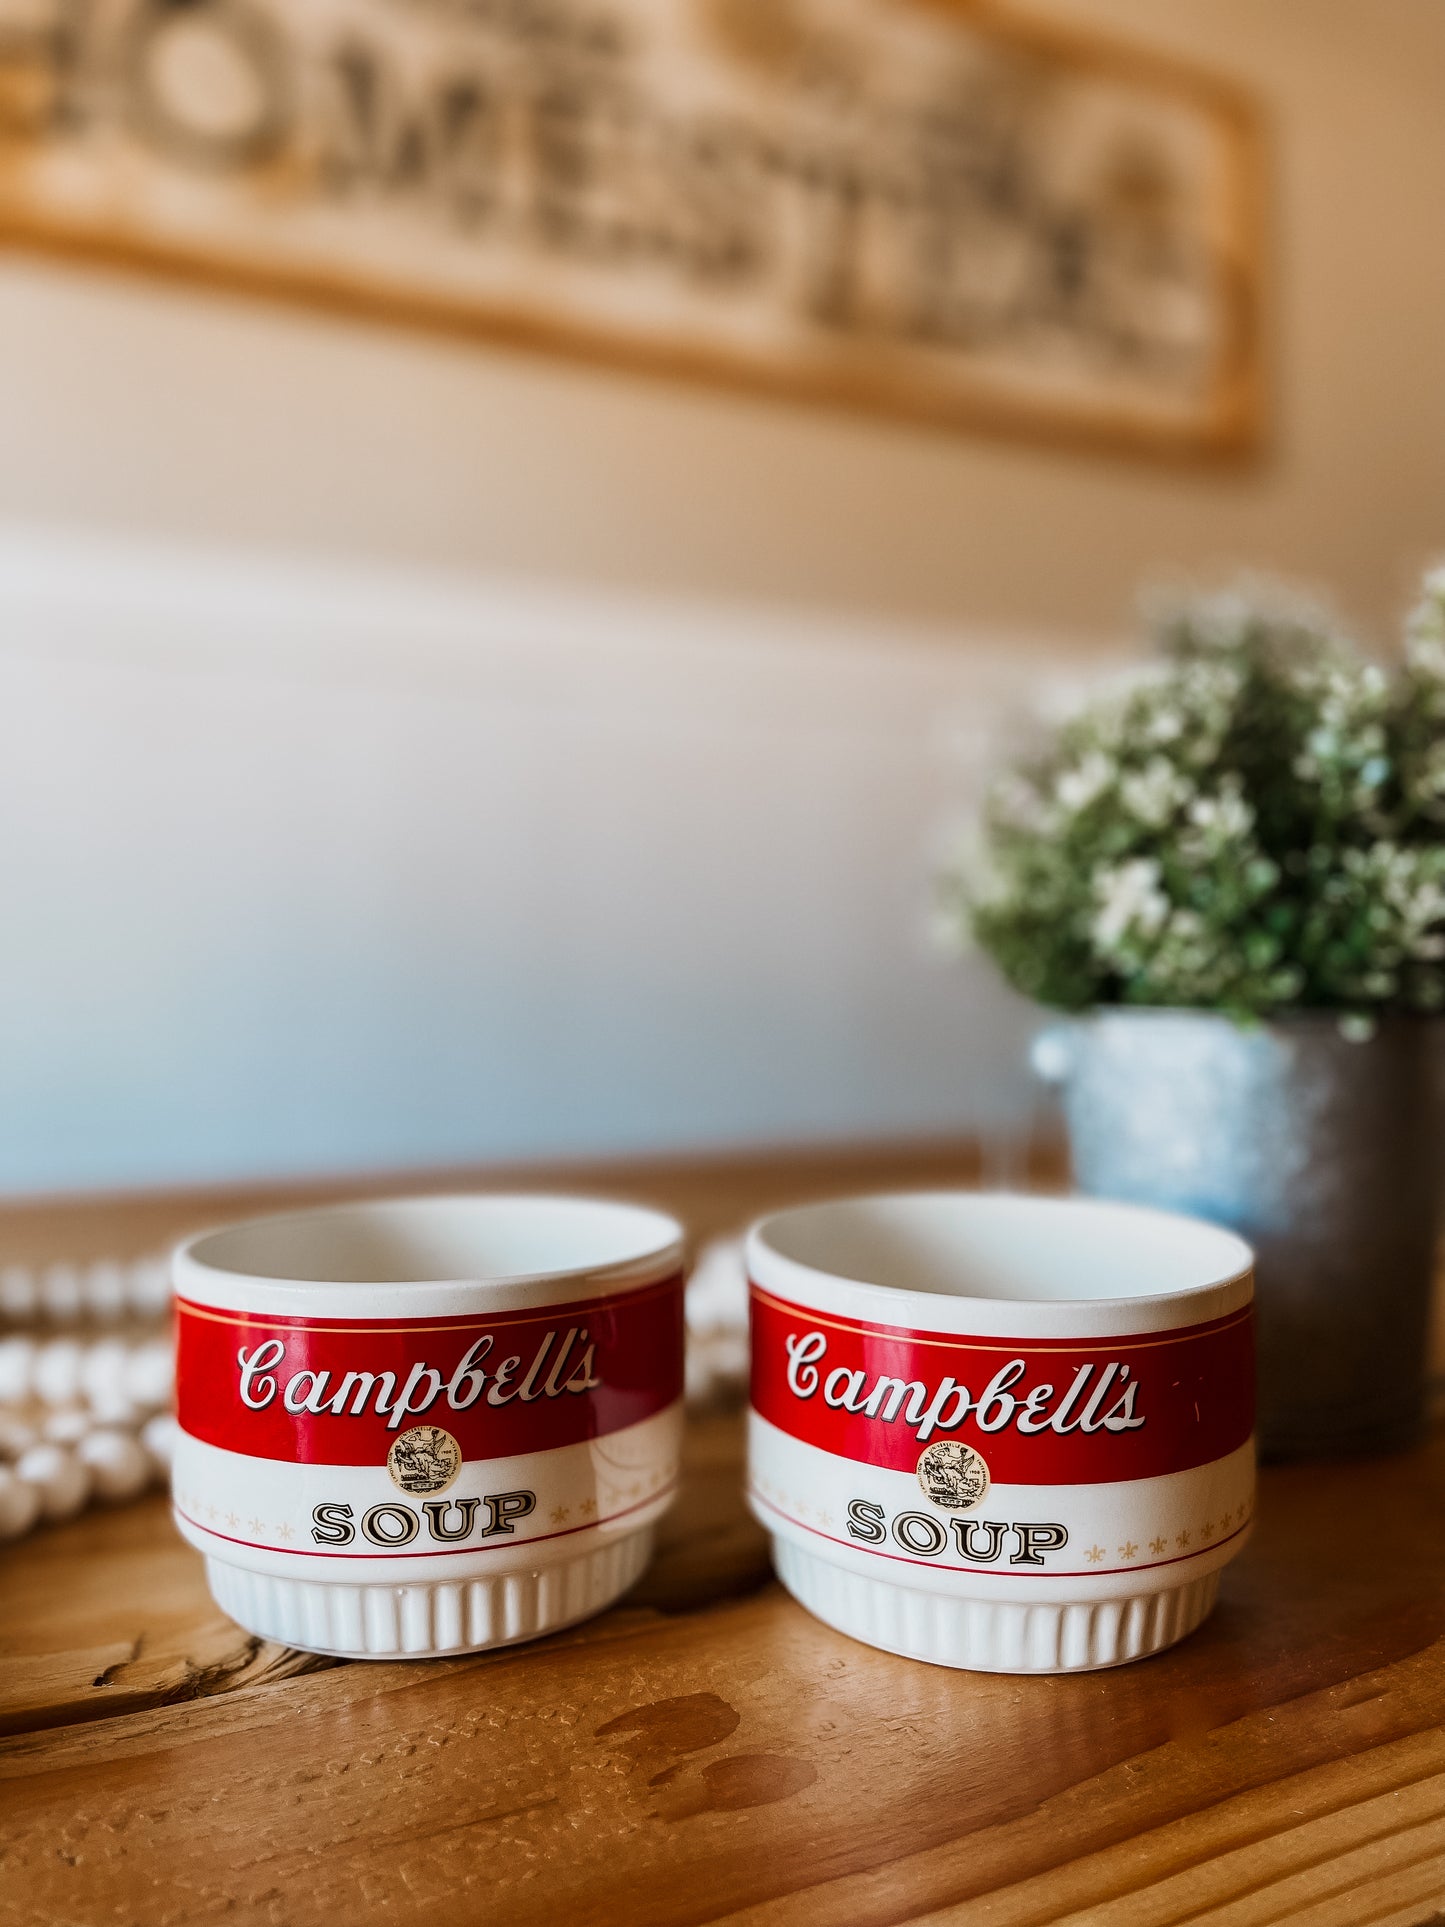 1968 First Edition Campbells Soup Bowls